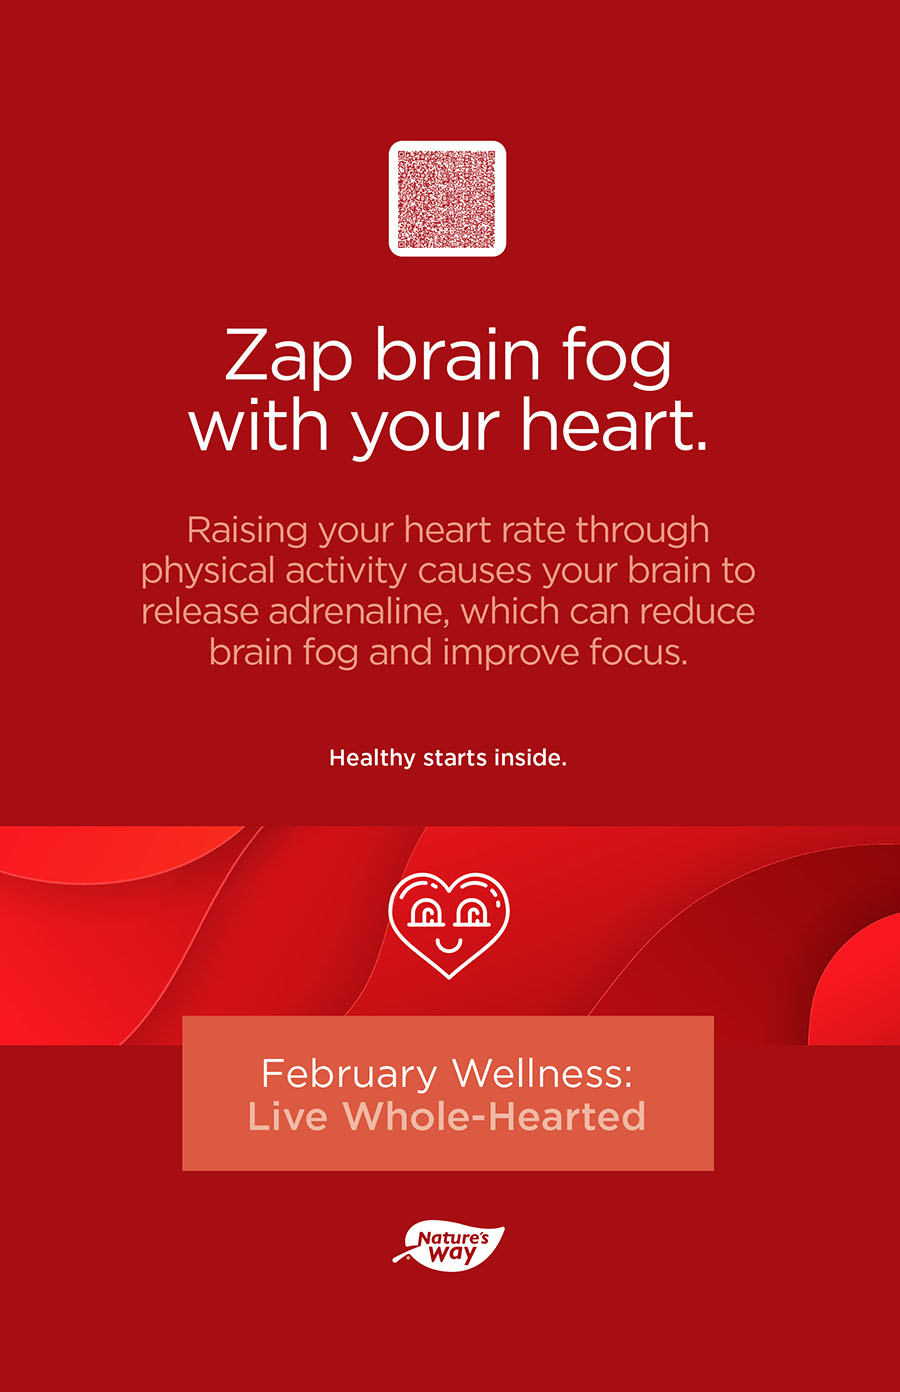 Natures Way Poster - Zap brain fog with your heart.